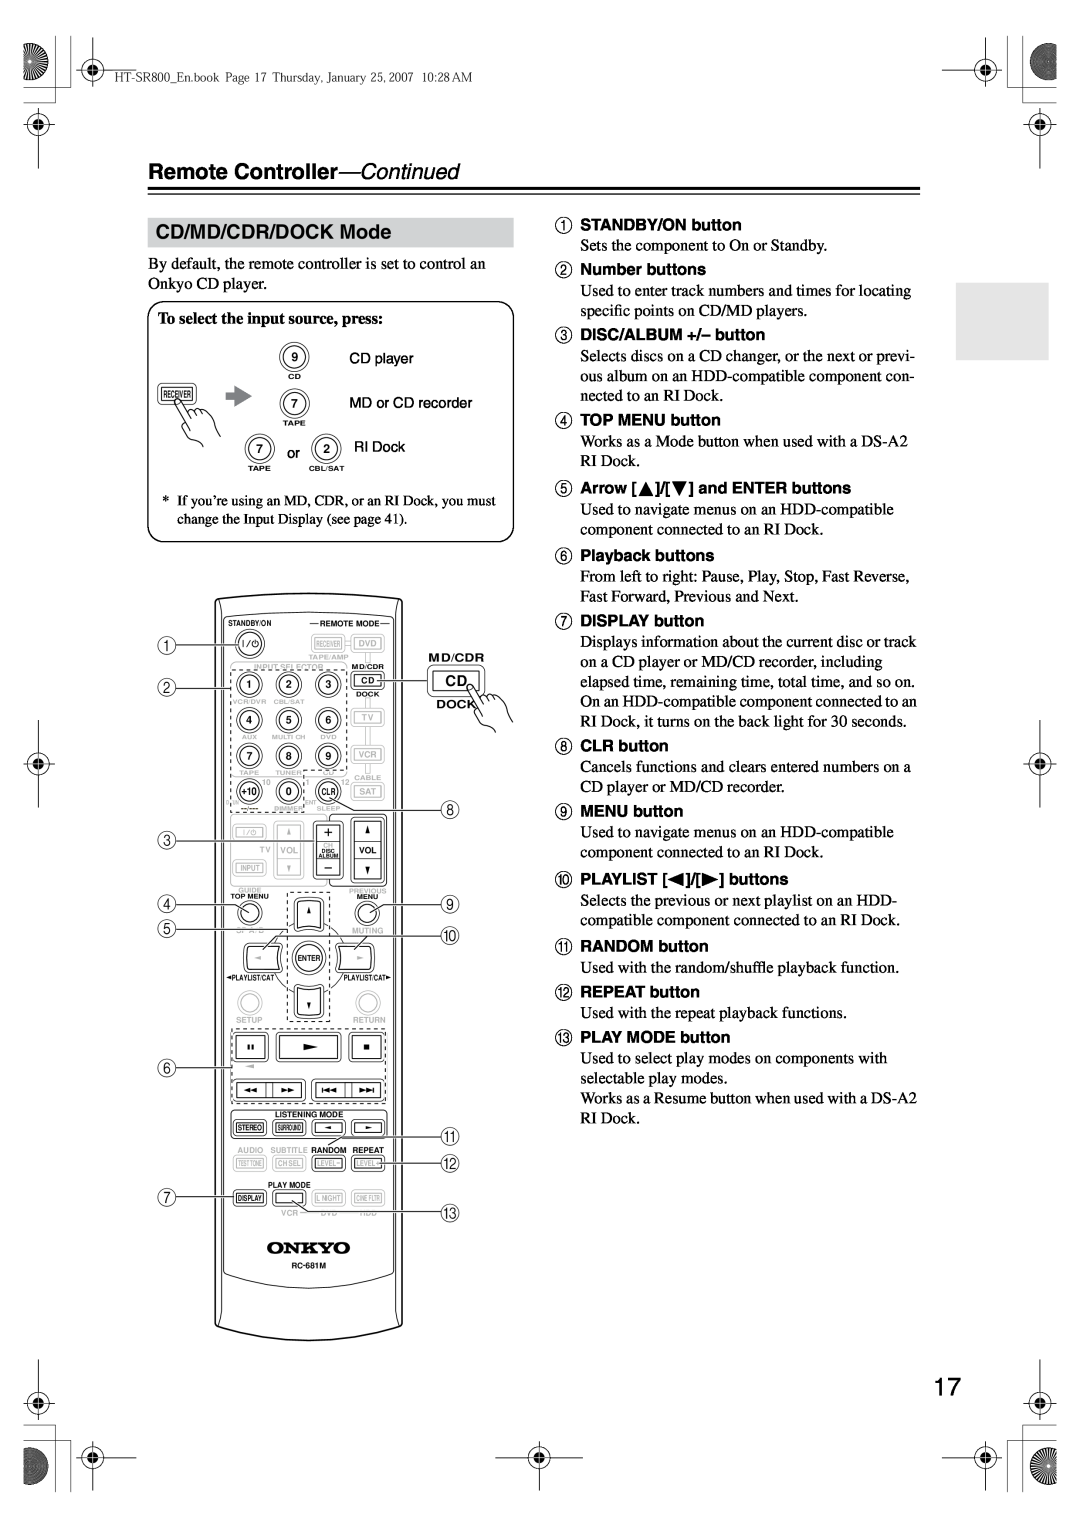 Onkyo HT-SR800 CD/MD/CDR/DOCK Mode, 1 2 3 4 5, Remote Controller-Continued, To select the input source, press 